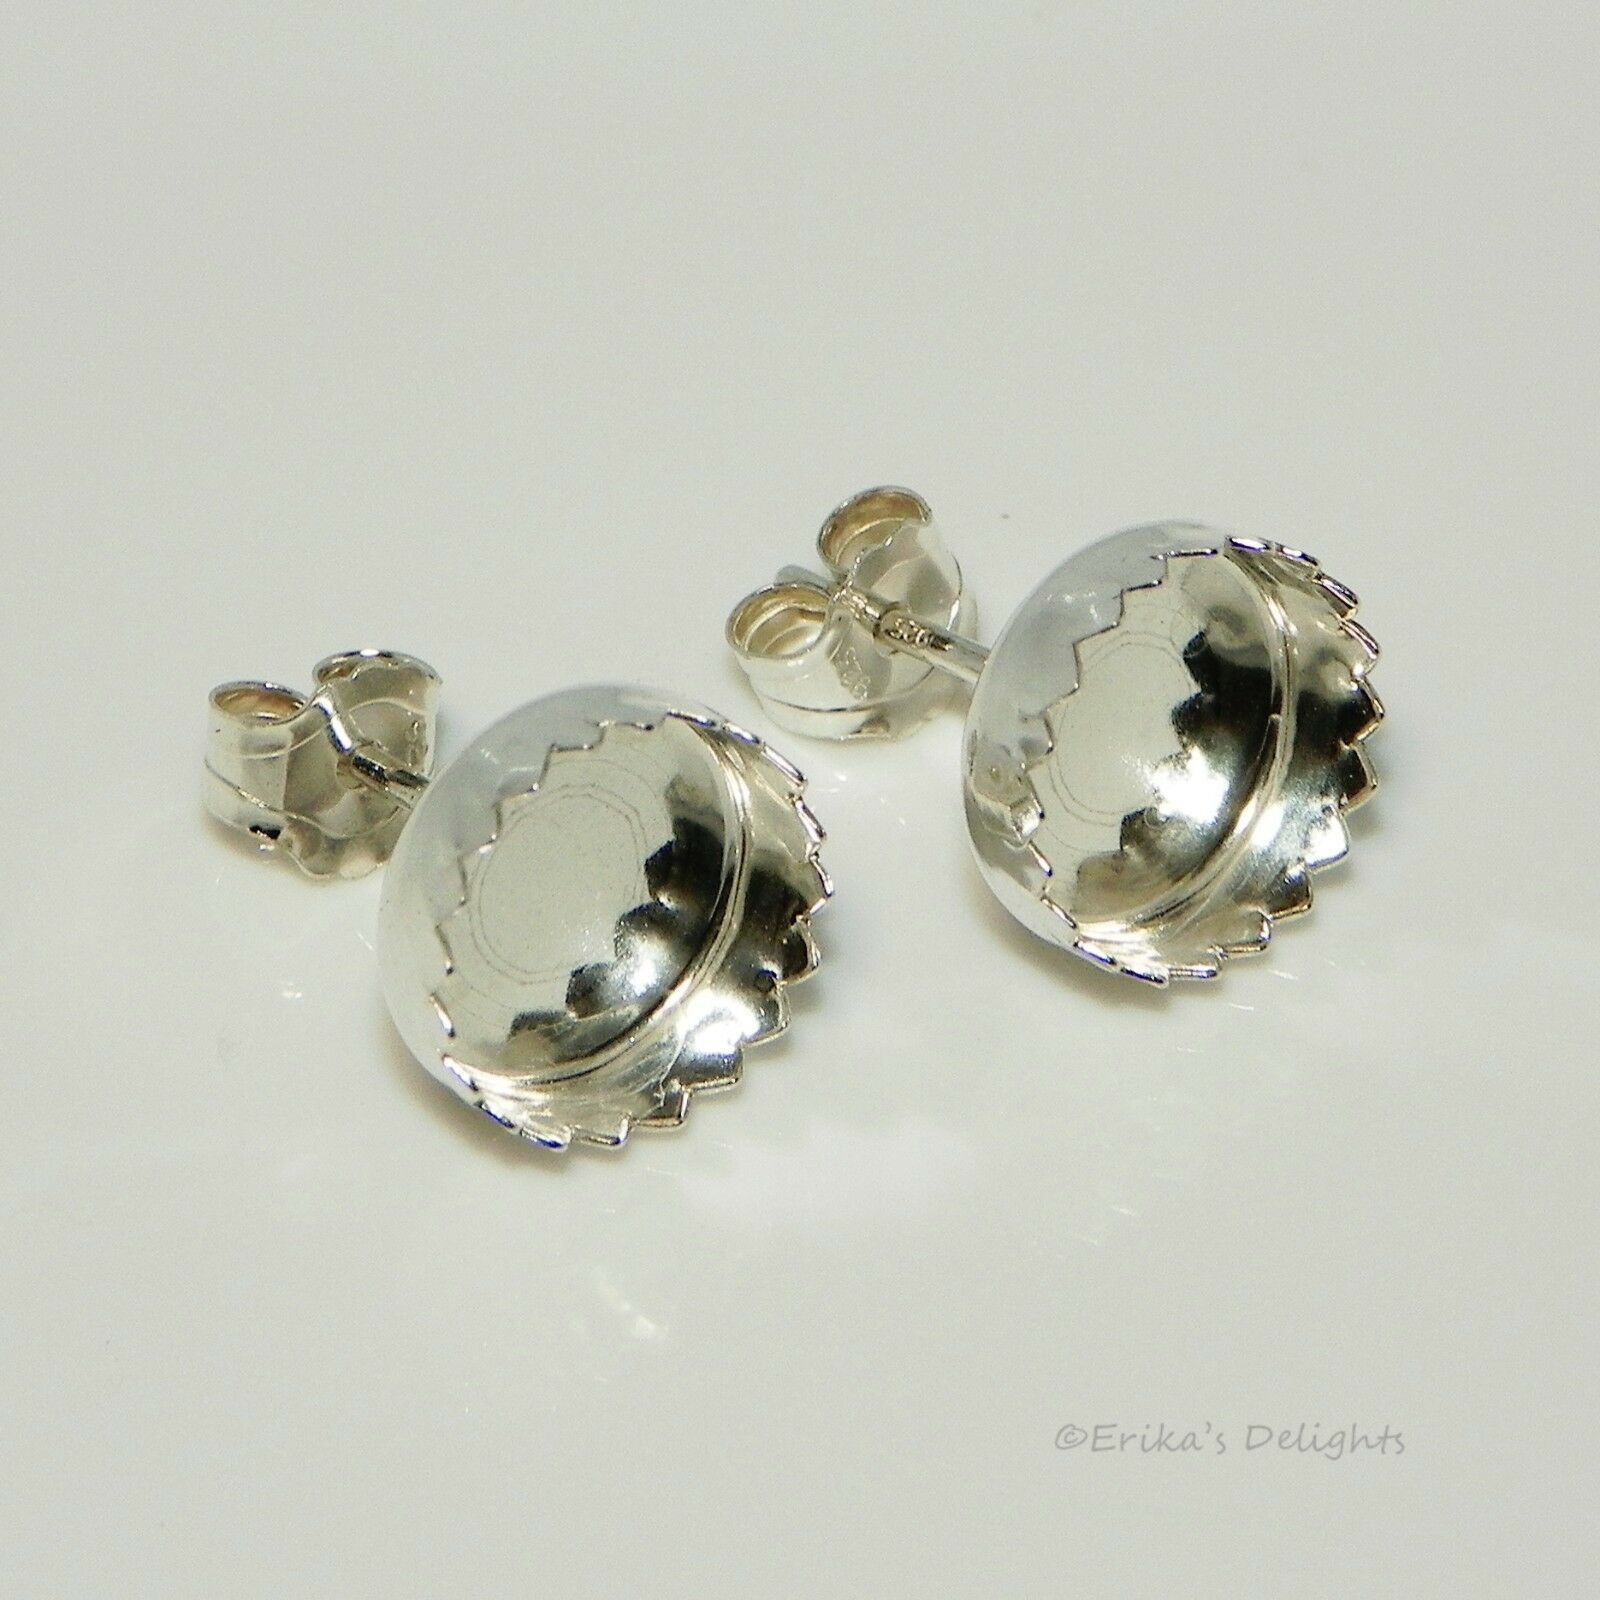 (3mm - 10mm) Round Fancy Cab (cabochon) Sterling Silver Earring Settings